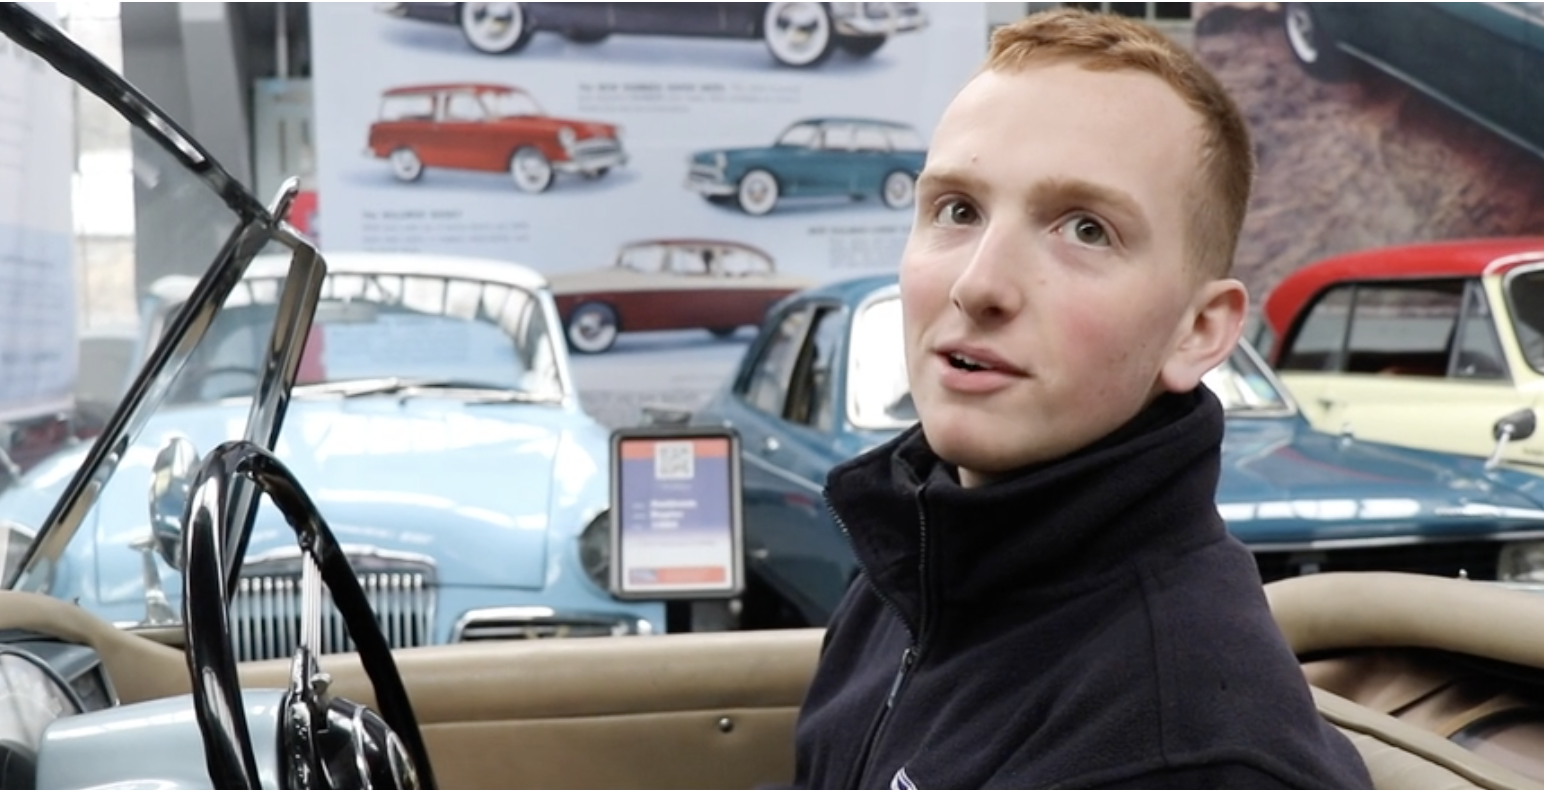 Teenager Who Restores British Museum Cars is Shortlisted for National Award